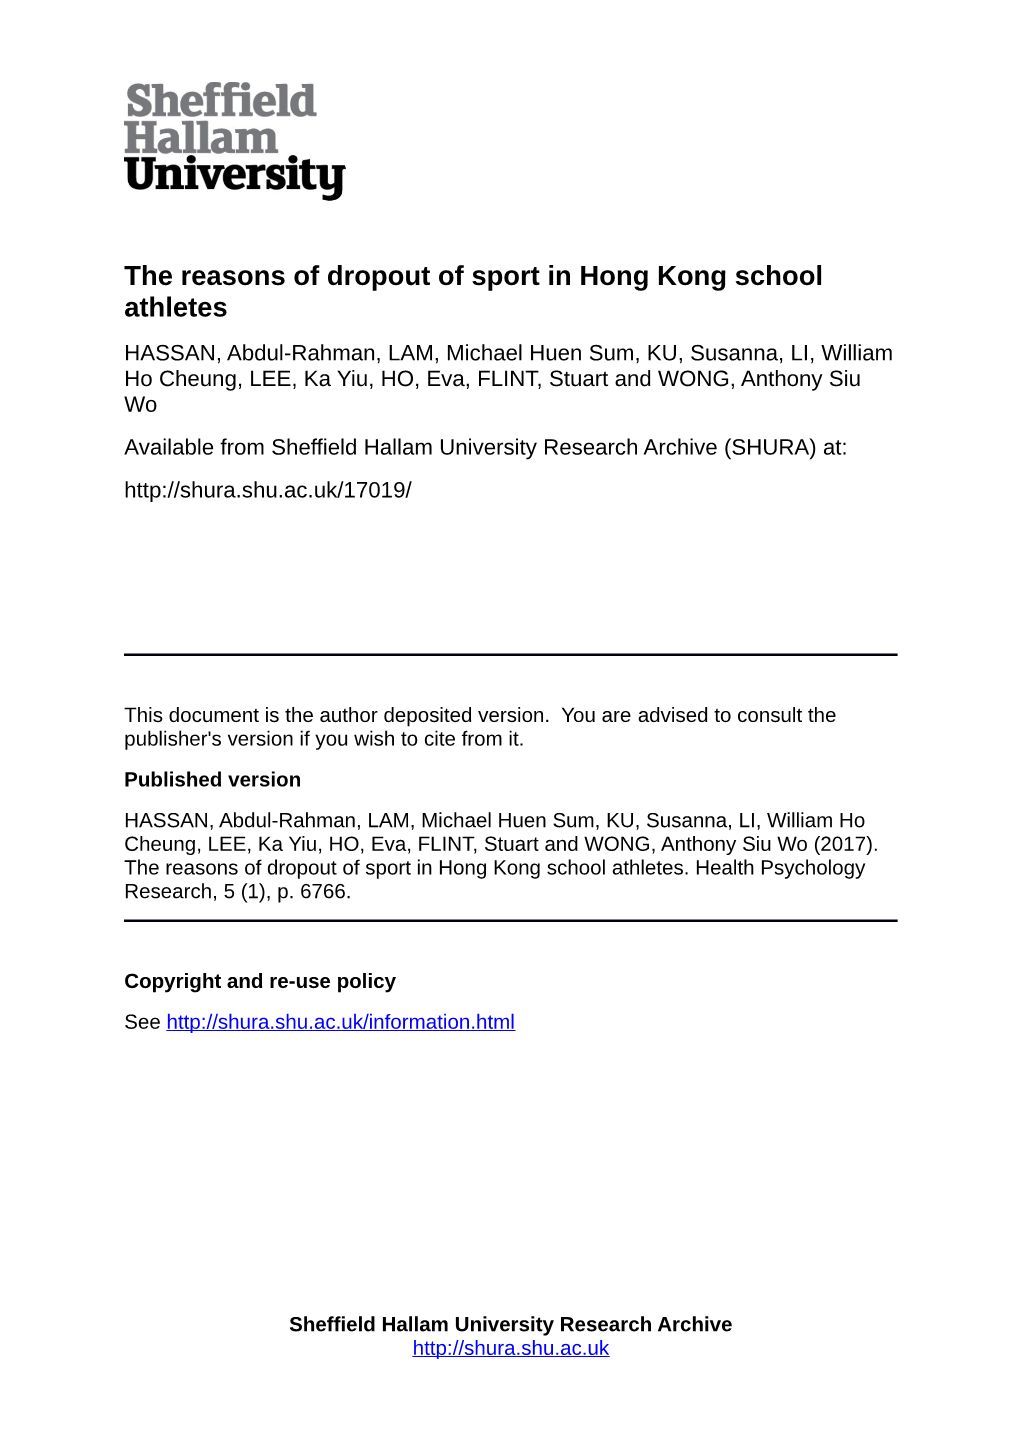 The Reasons of Dropout of Sport in Hong Kong School Athletes